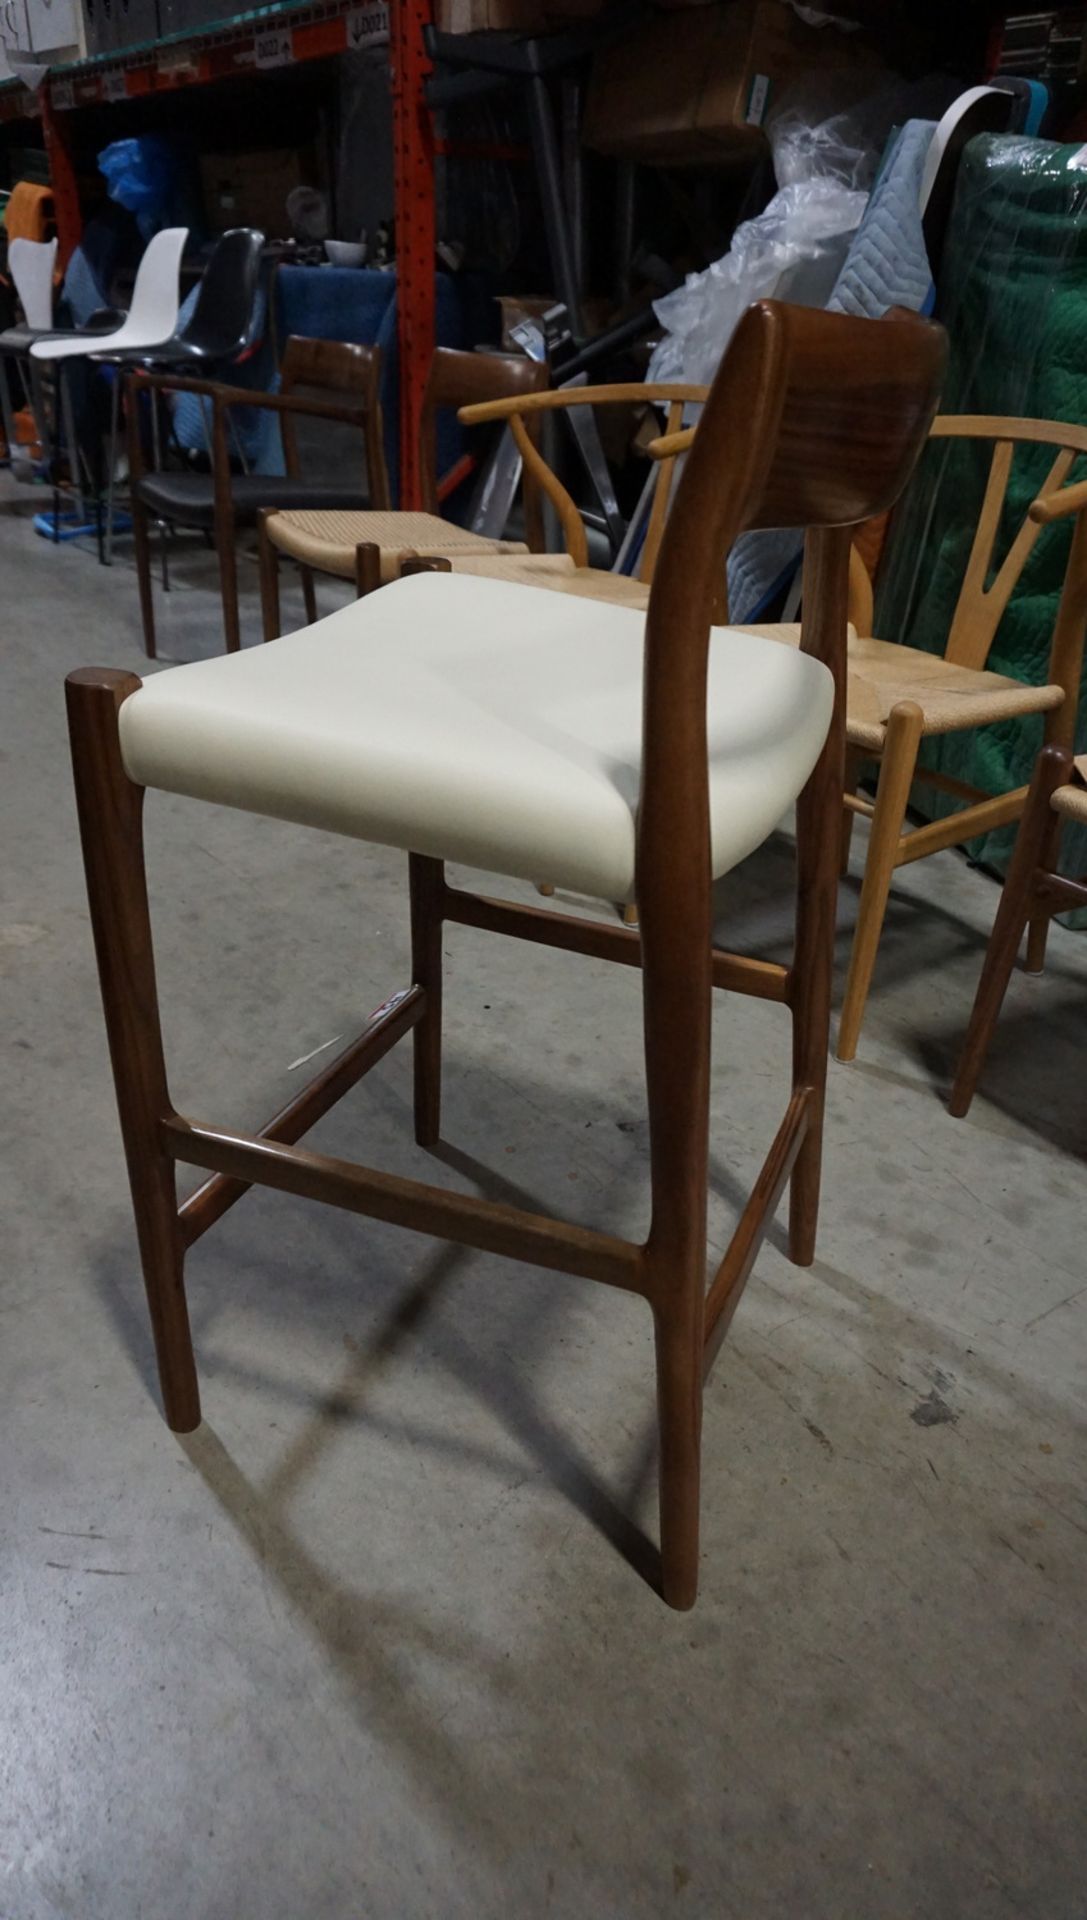 J. L. MOLLER CHAIR MODEL 57 WOOD STOOL (MADE IN DENMARK) (MSRP $2,495) - Image 2 of 2